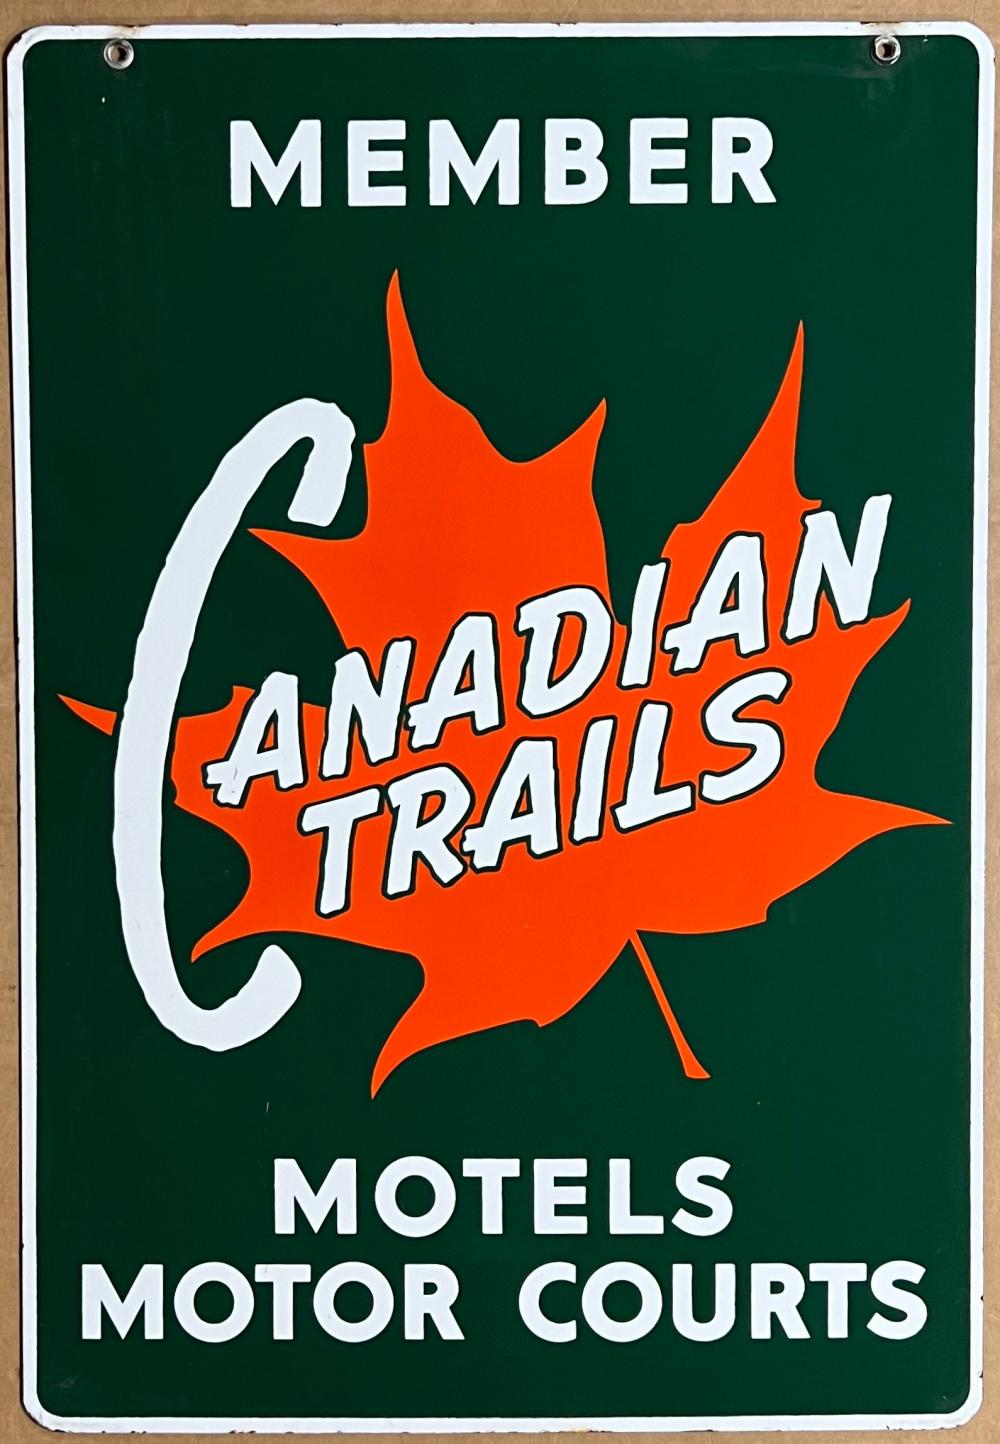 CANADIAN TRAILS MOTELS MOTOR COURTS 2e2932